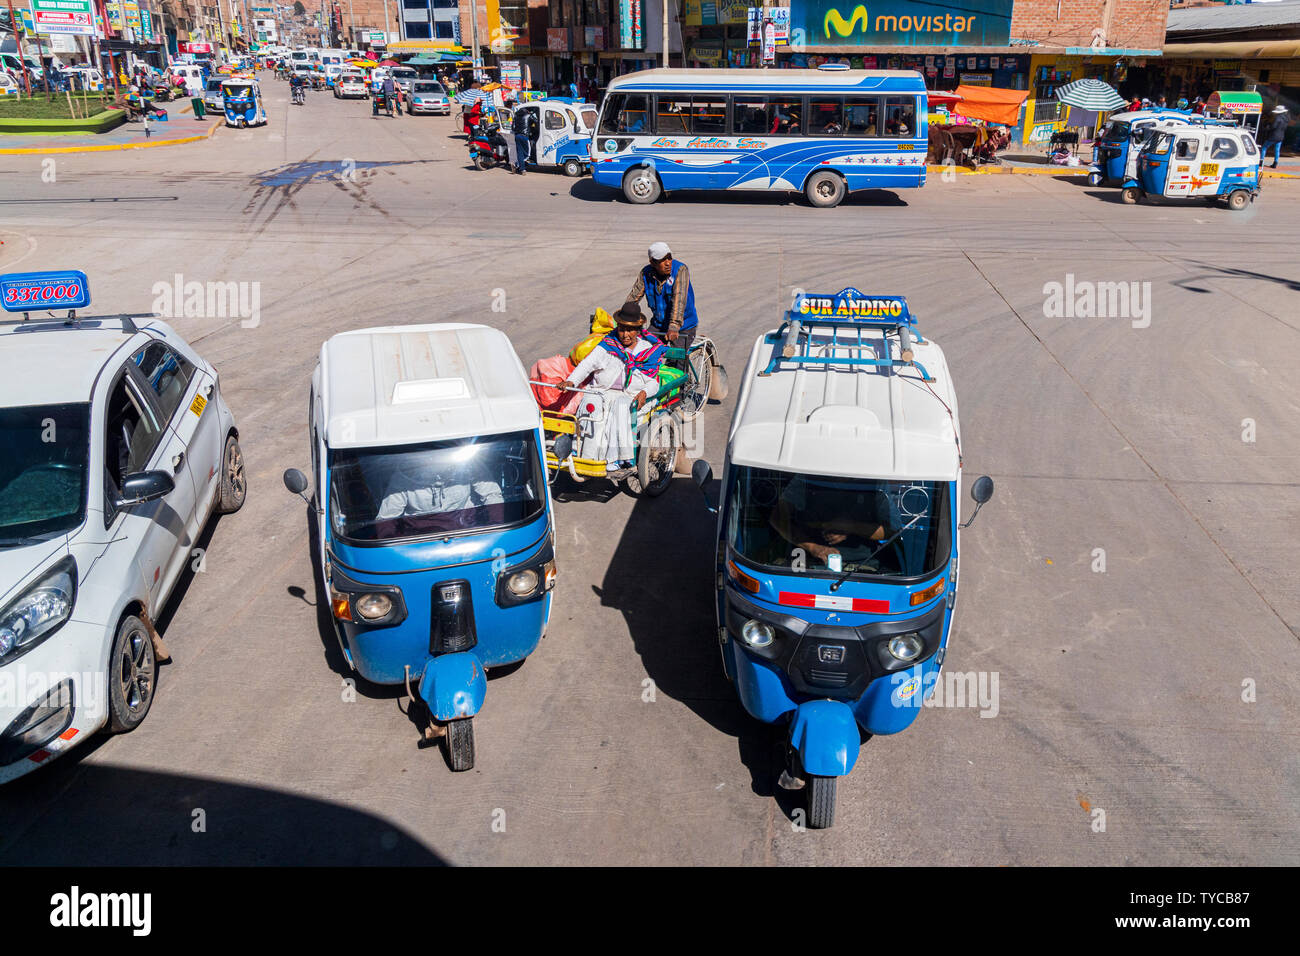 Traffic, tuk tuks and cycle taxi in Puno. Bus trip from Puno to Cusco, Peru, Stock Photo